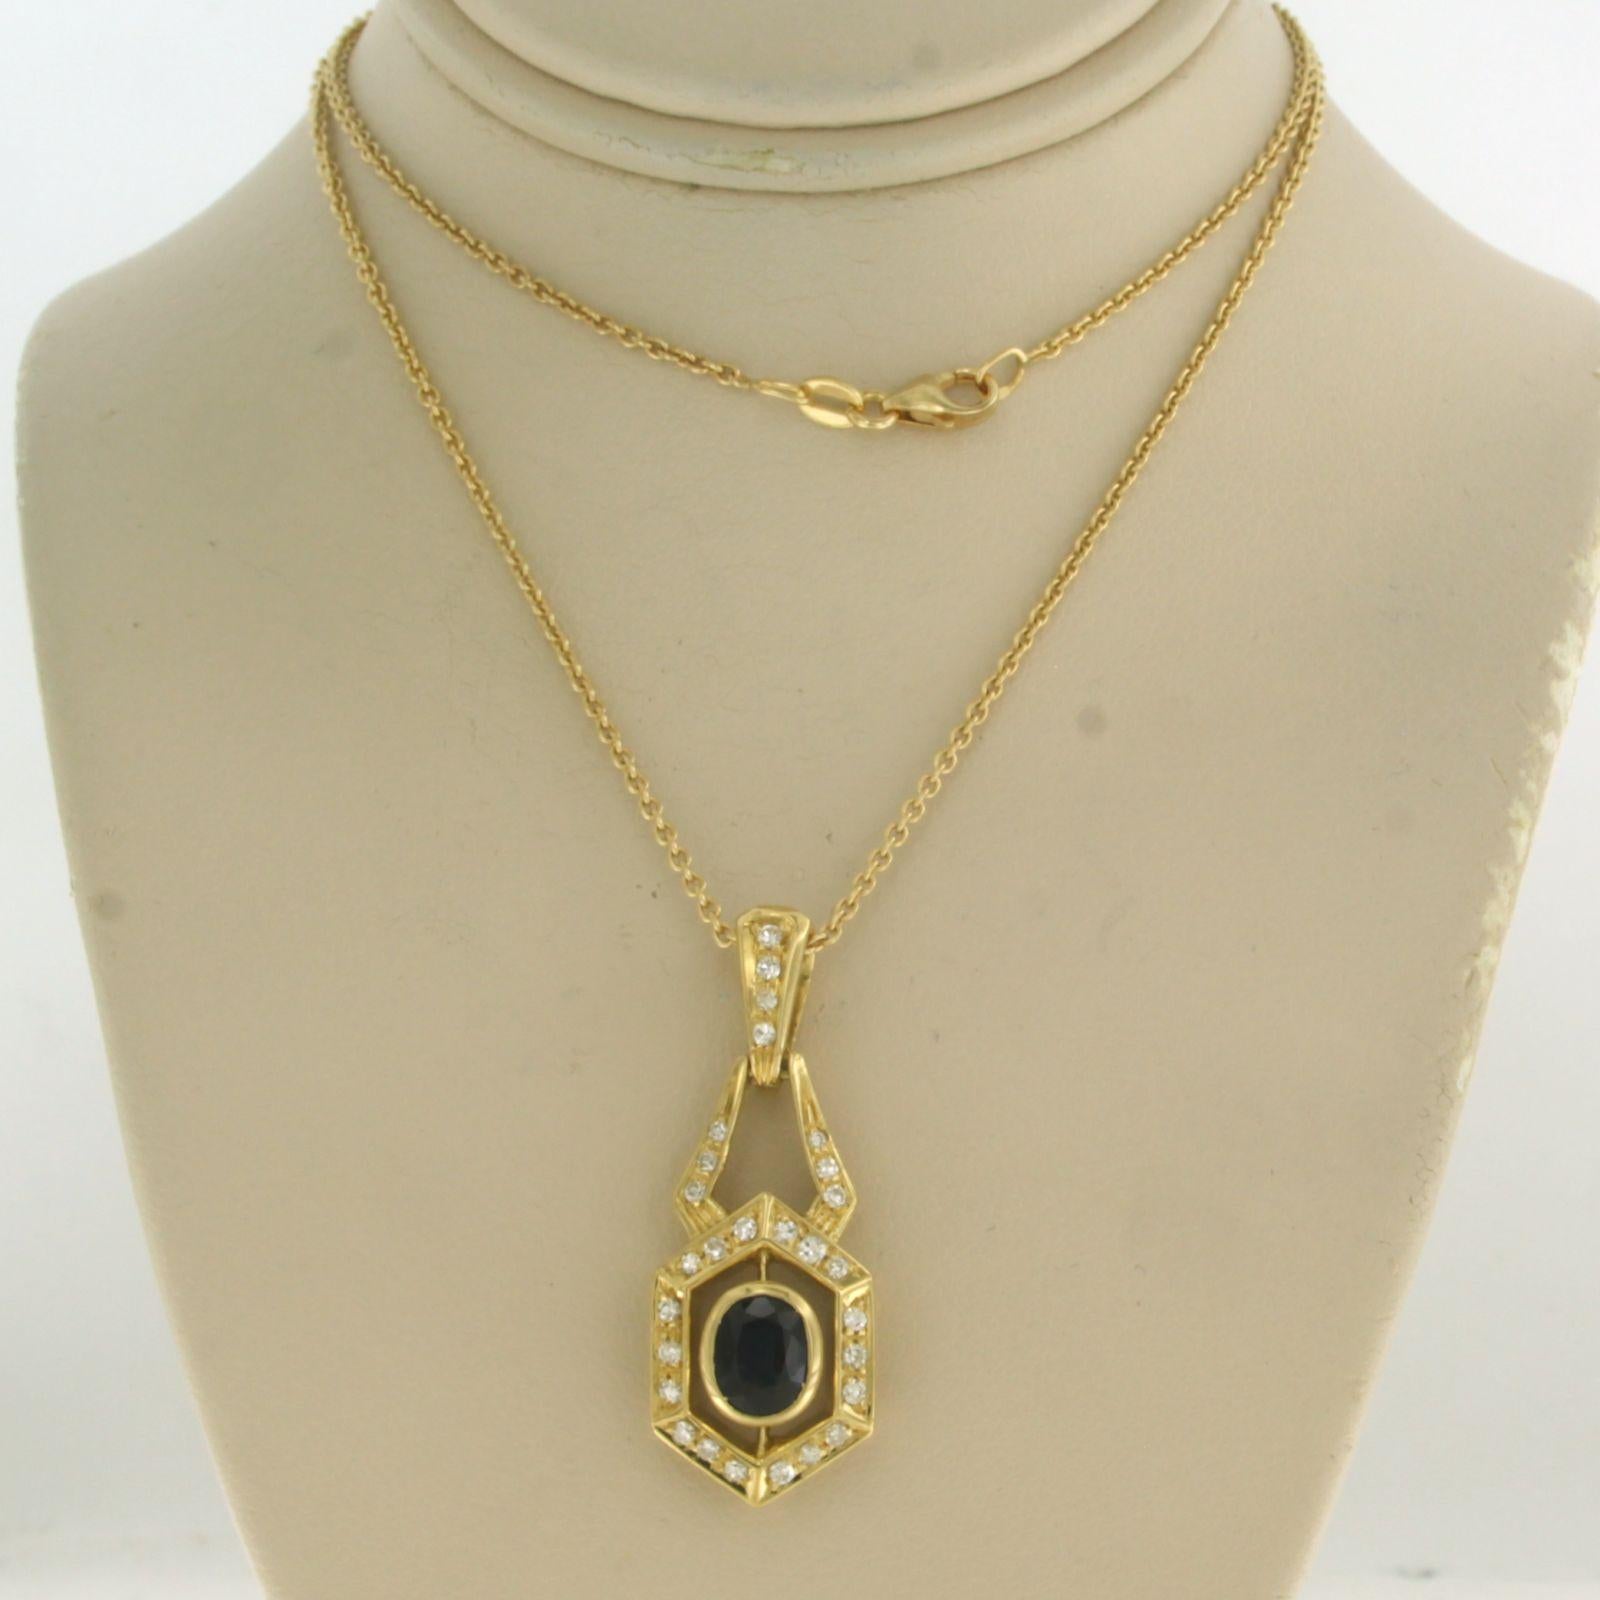 18k yellow gold necklace and pendant set with sapphire to. 0.70ct and single cut diamond 0.24ct - F/G - VS/SI - 50 cm long

Detailed description

the length of the necklace is 50 cm long by 1.4 mm wide

Dimensions of the pendant are 3.3 cm long by